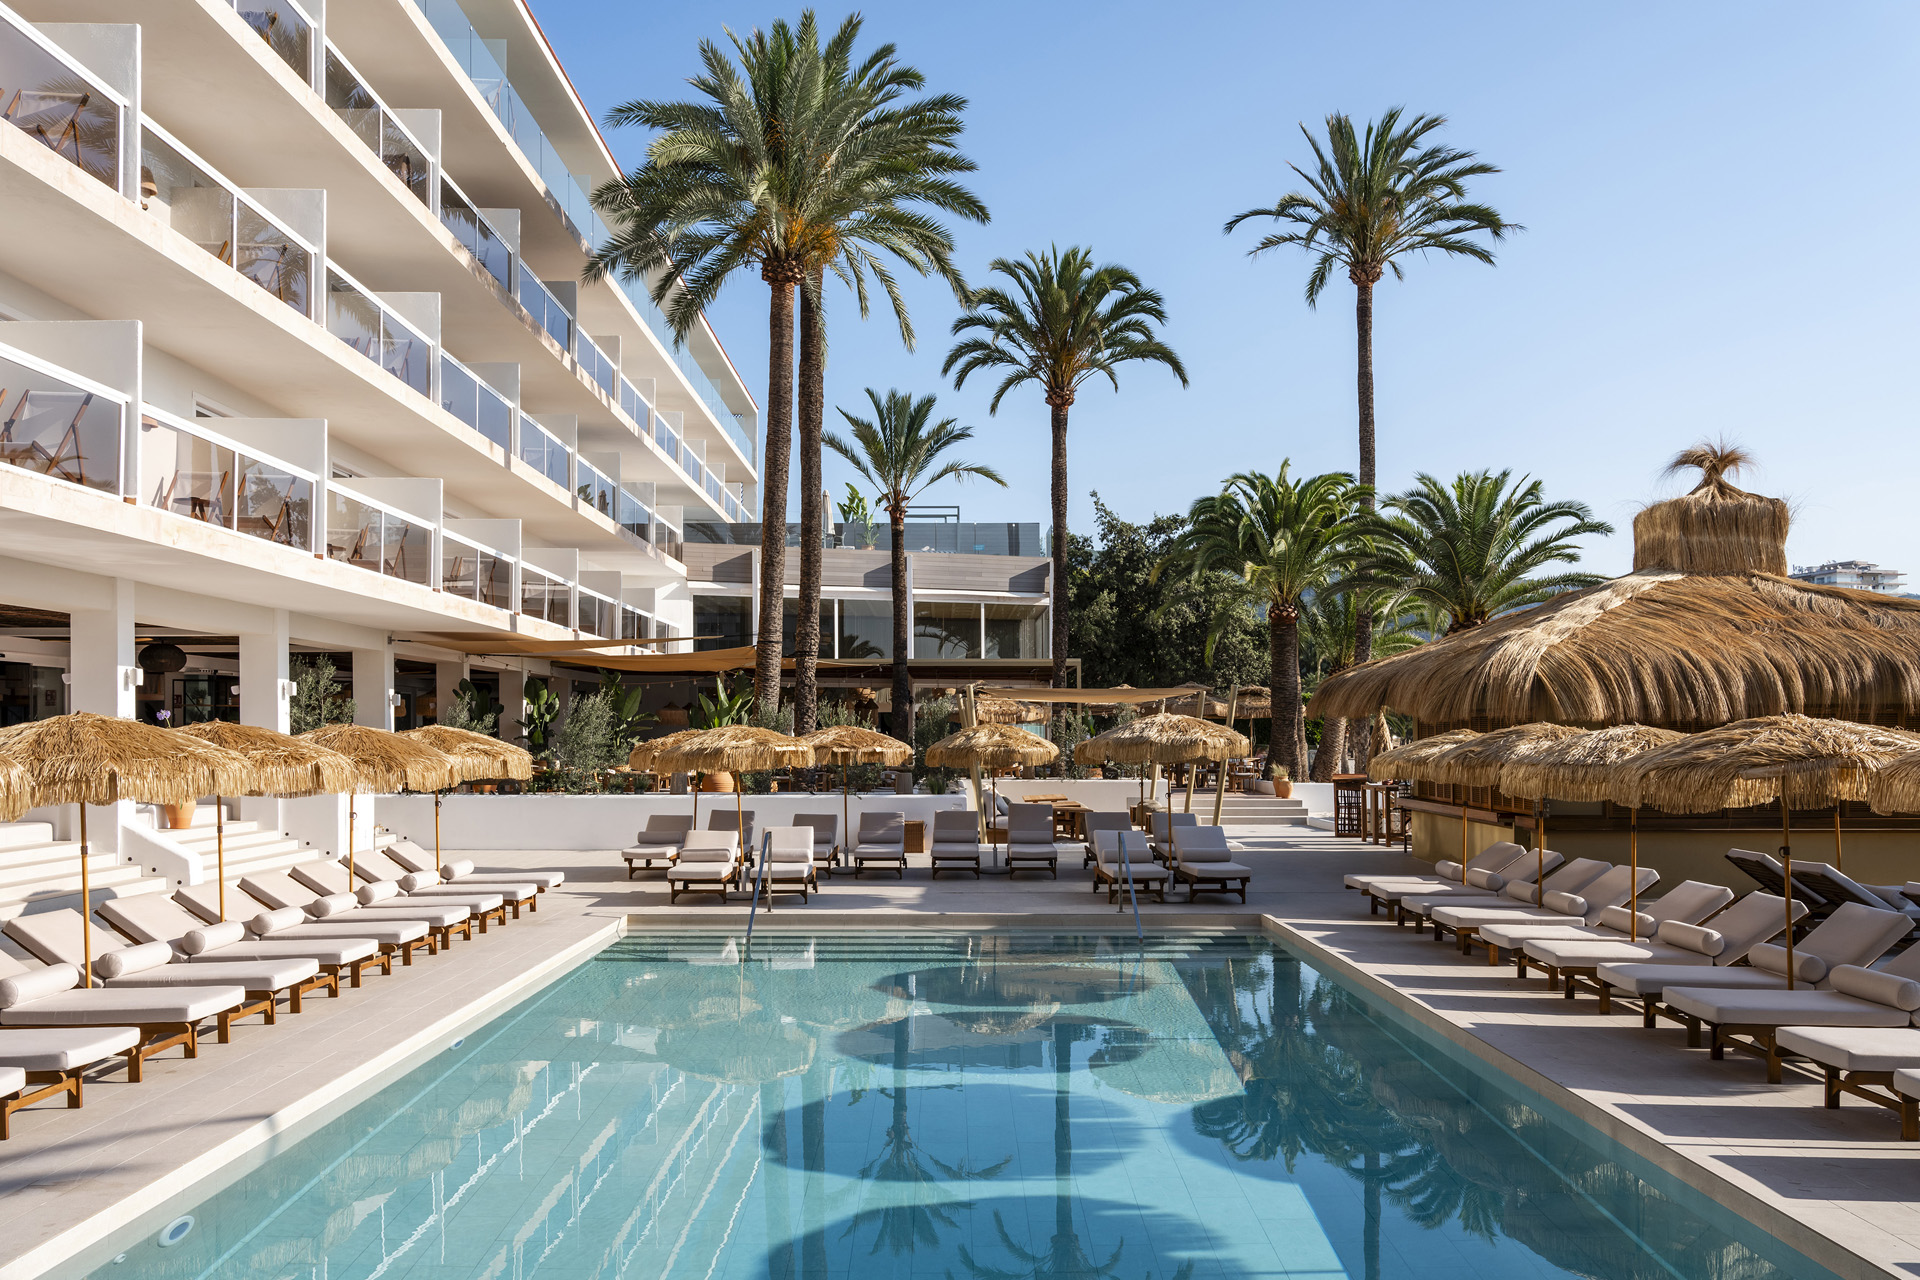 A Weekend Of Razzle Dazzle At Hotel Zel Mallorca – Review